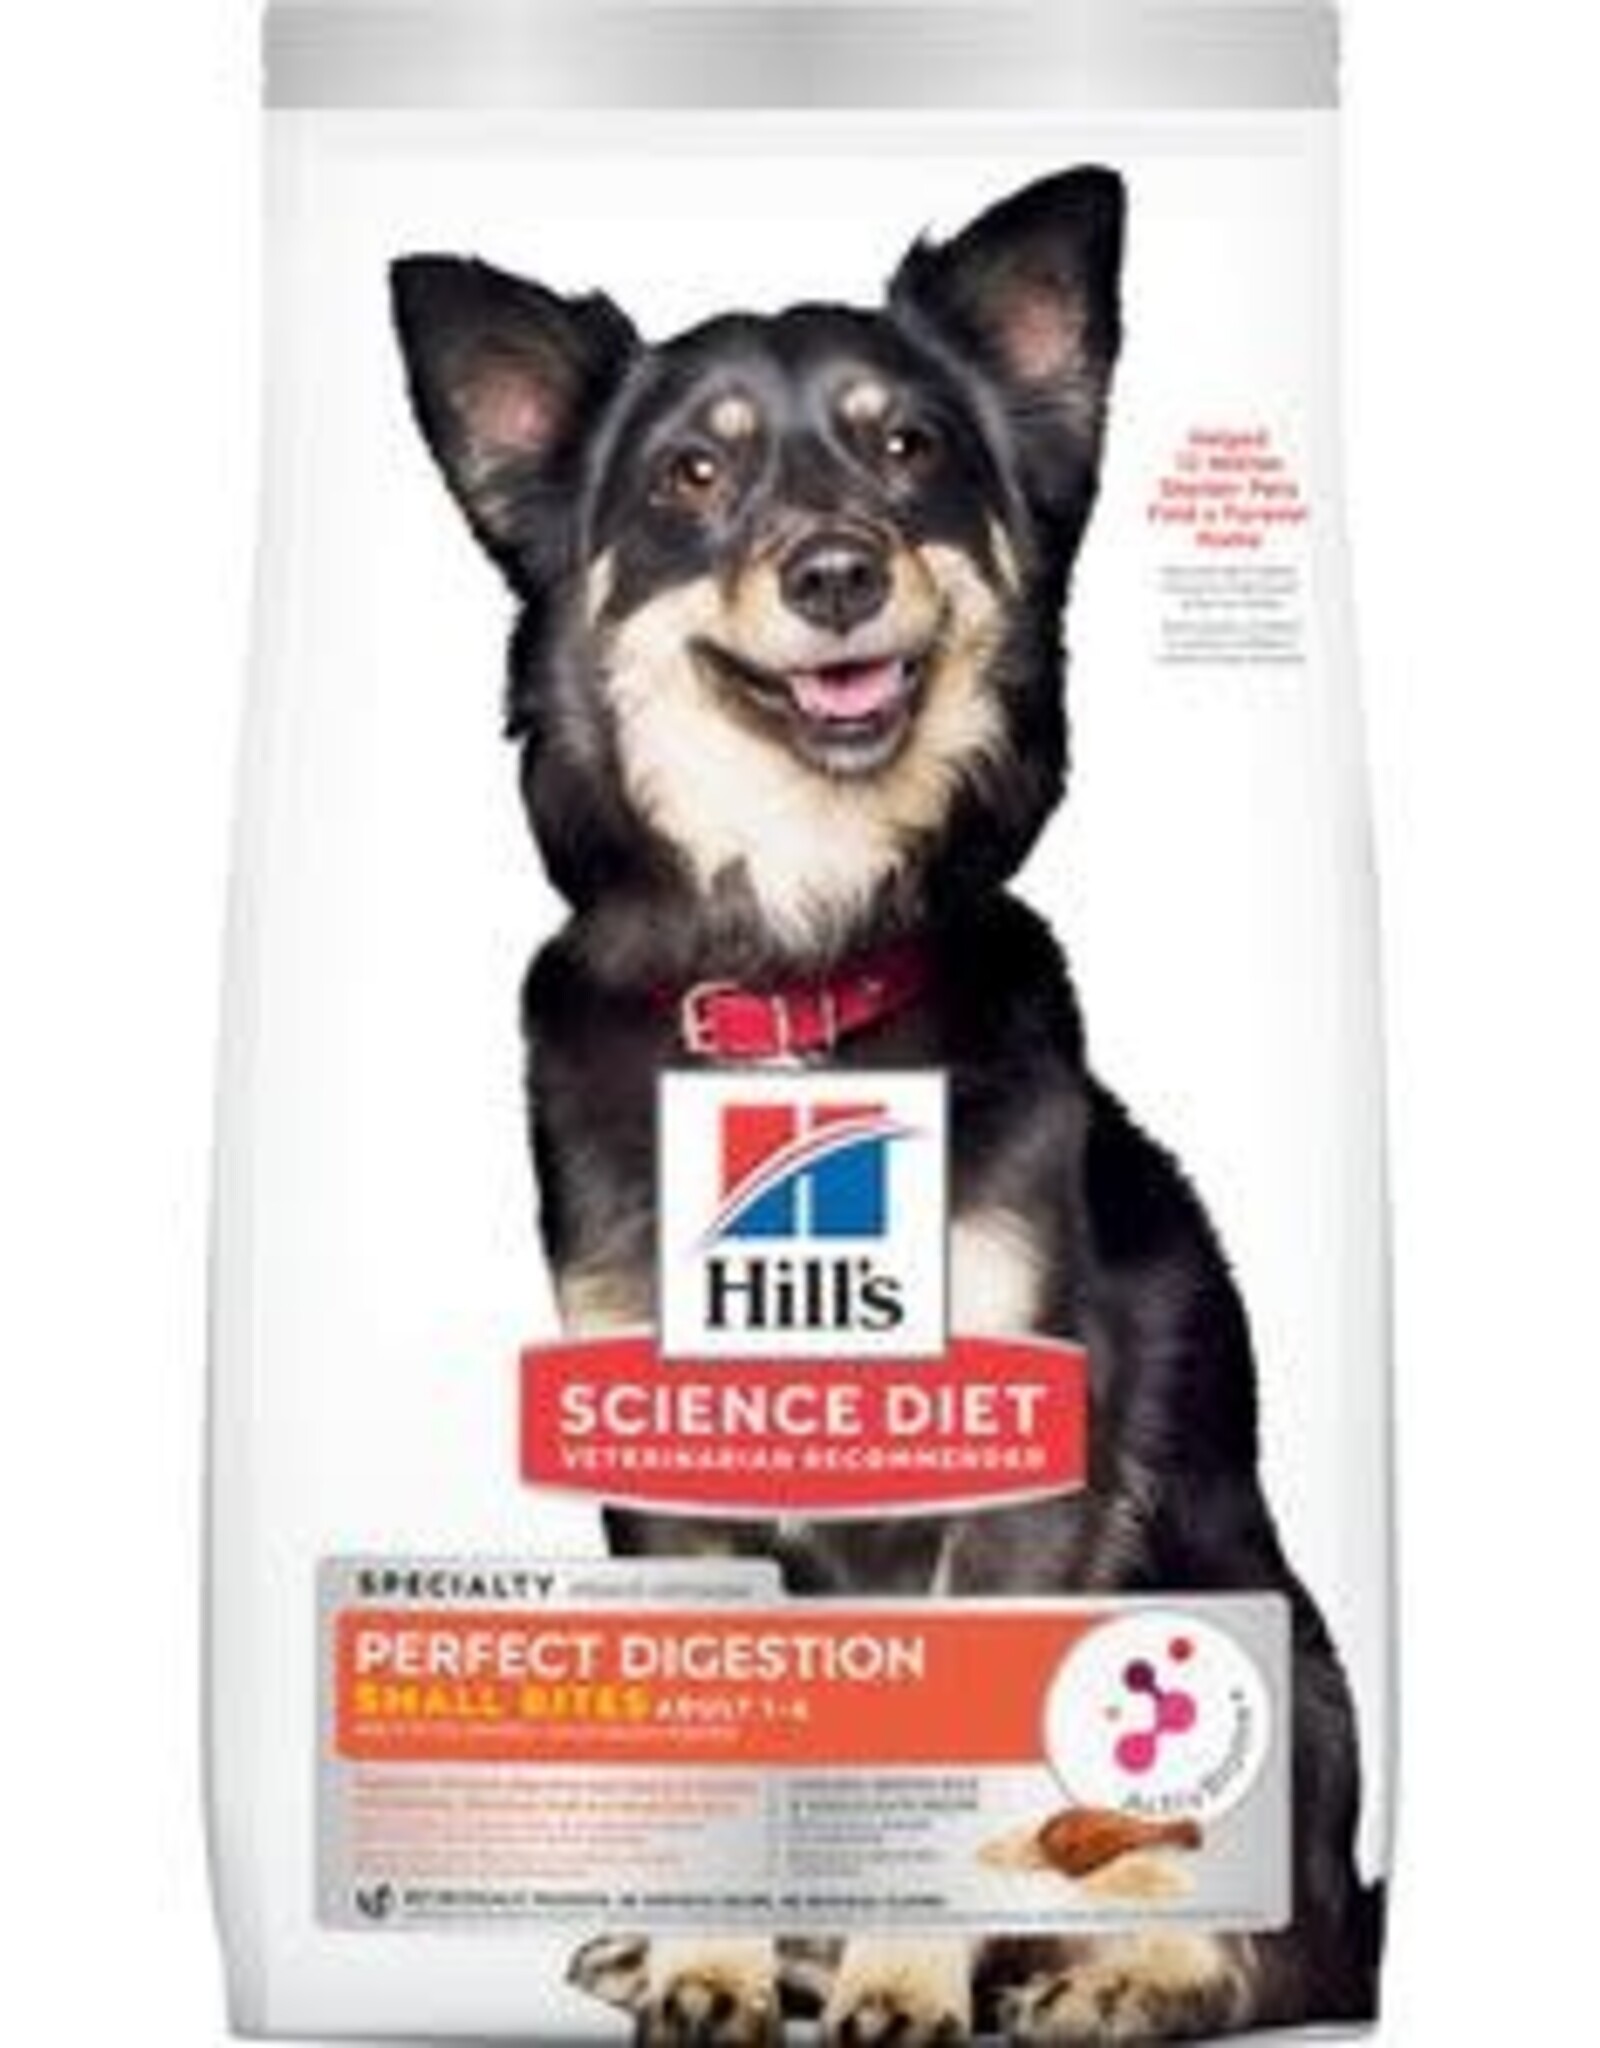 SCIENCE DIET HILL'S SCIENCE DIET DOG ADULT PERFECT DIGESTION CHICKEN SMALL BITES 12 LB